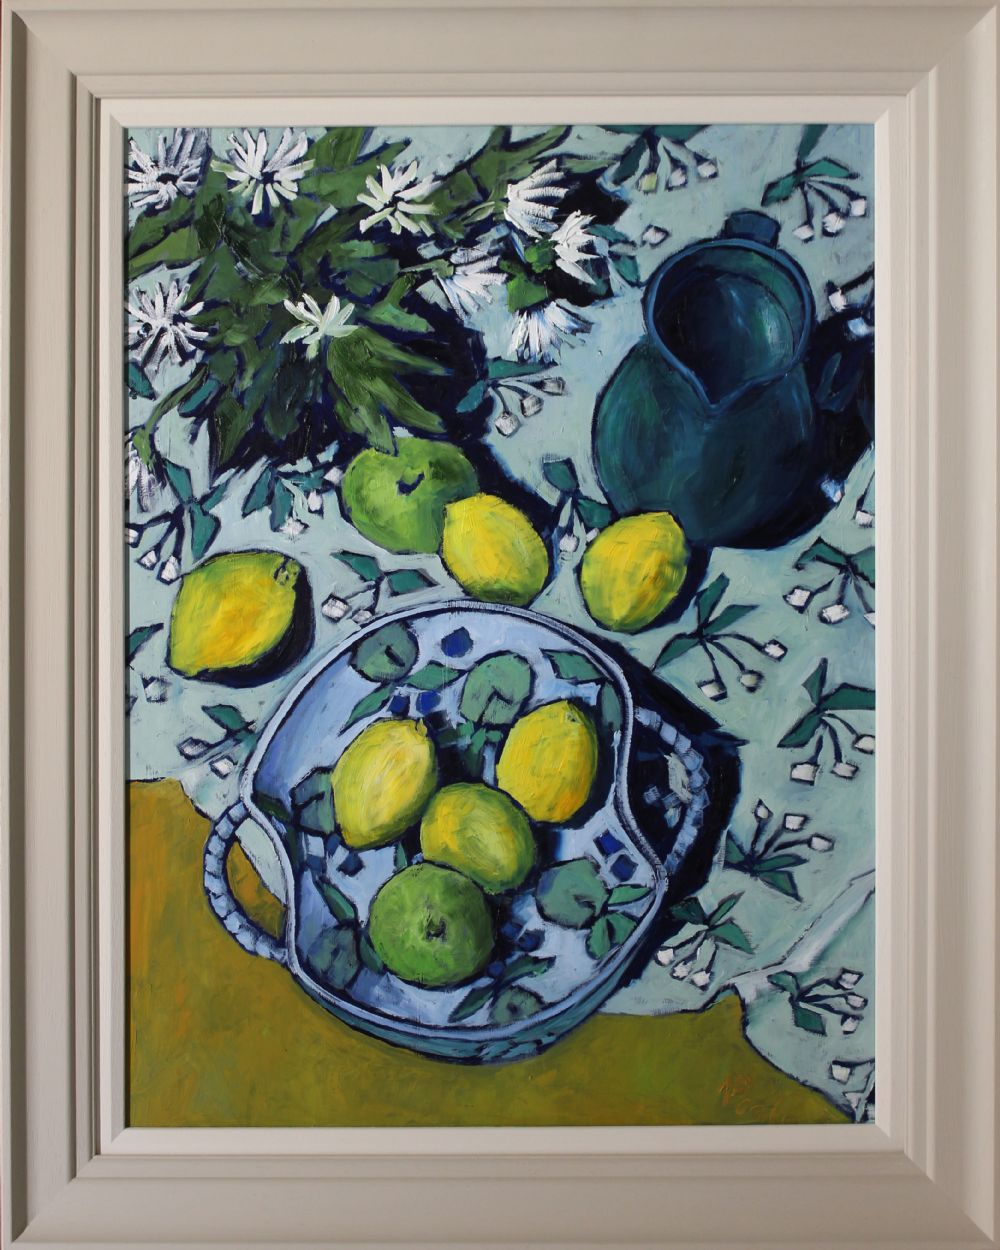 LEMONS ON ITALIAN CLOTH by Patrick Viale sold for €800 at deVeres Auctions